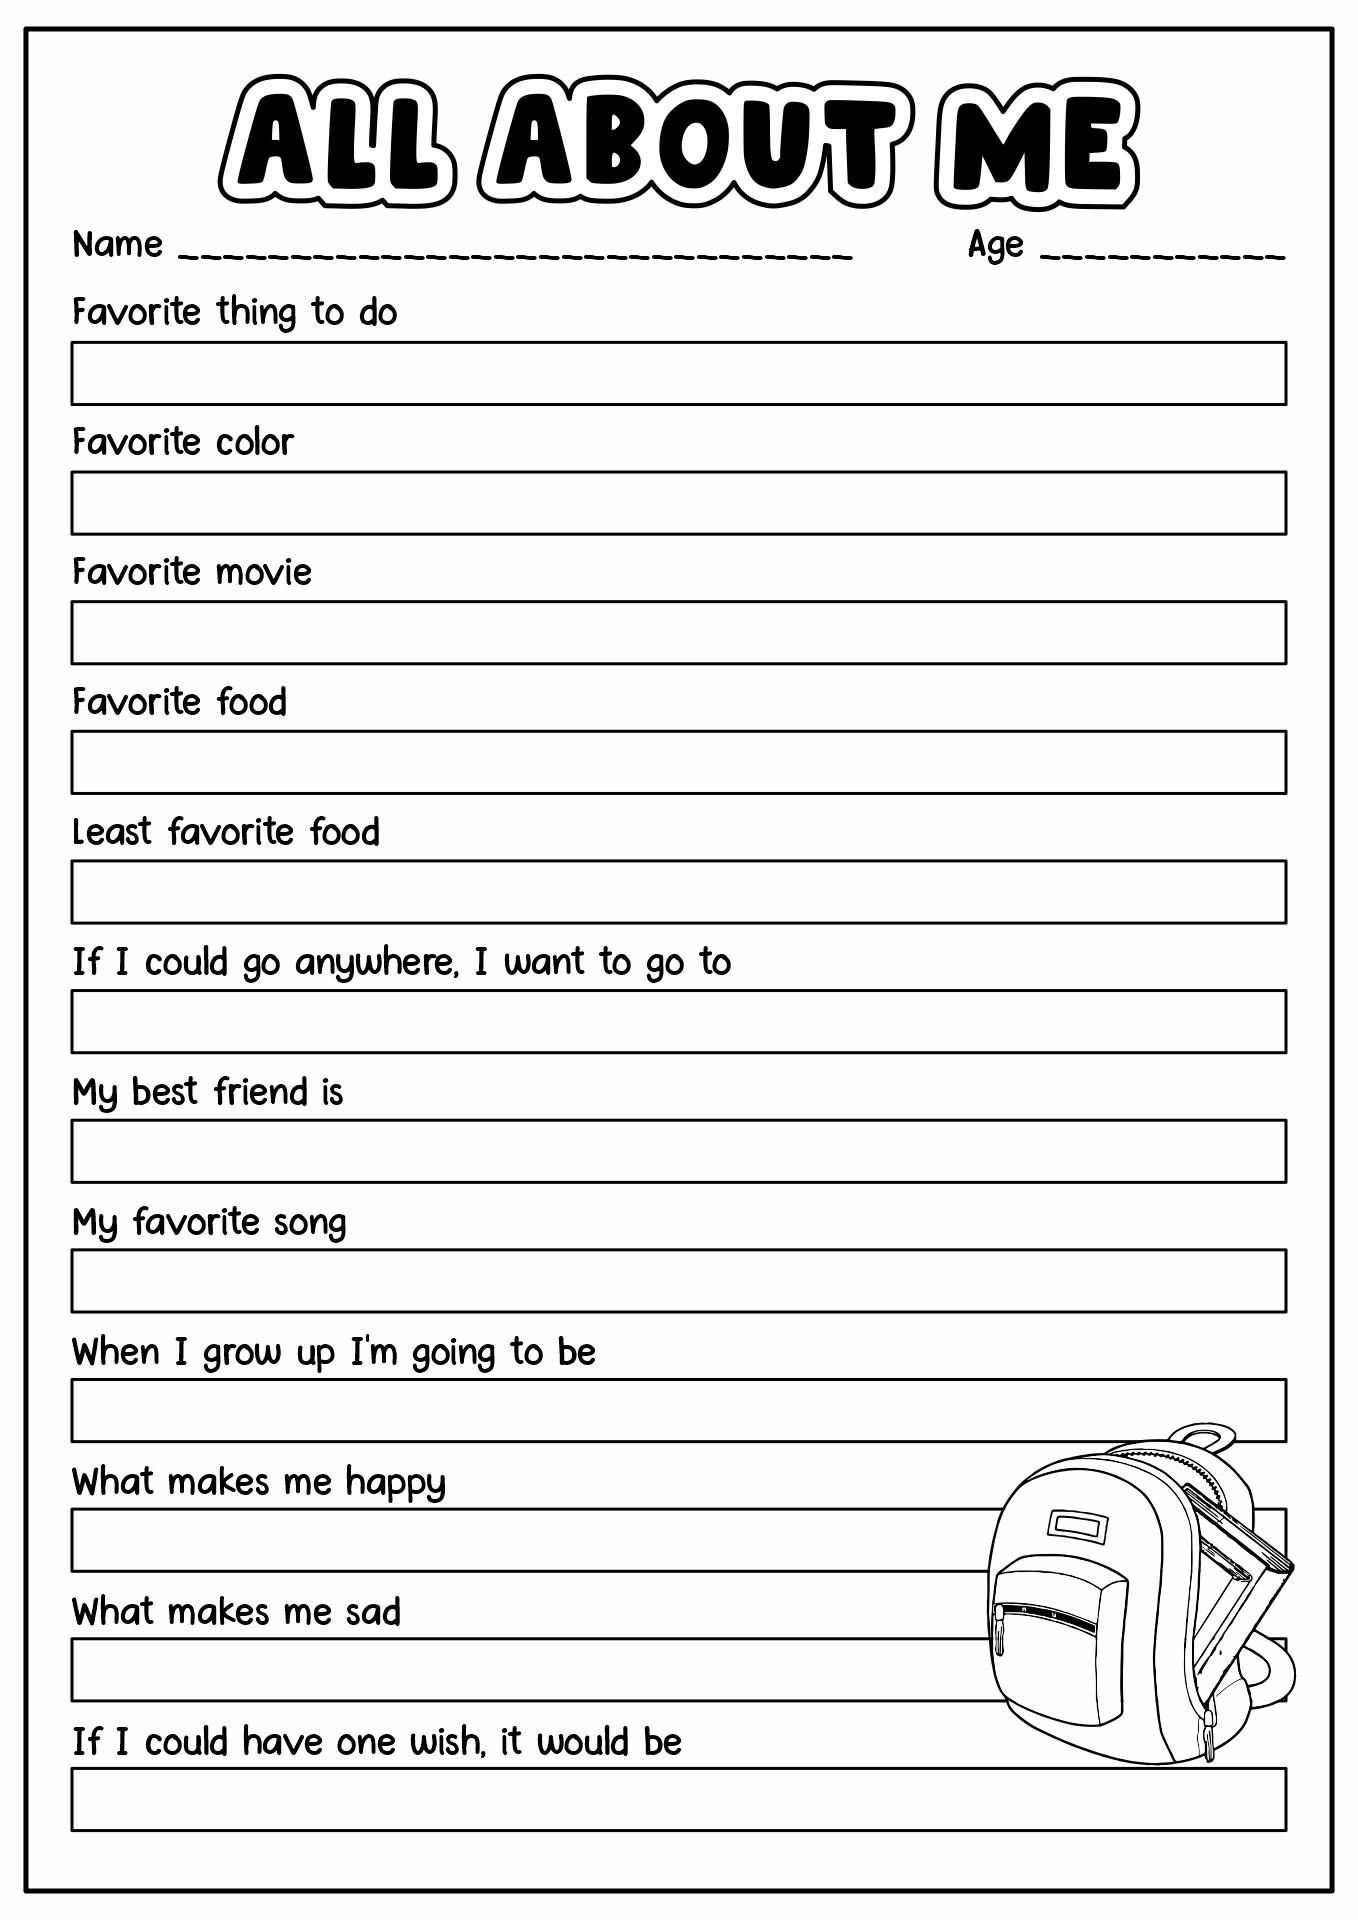 All About Me Questions Free Printable